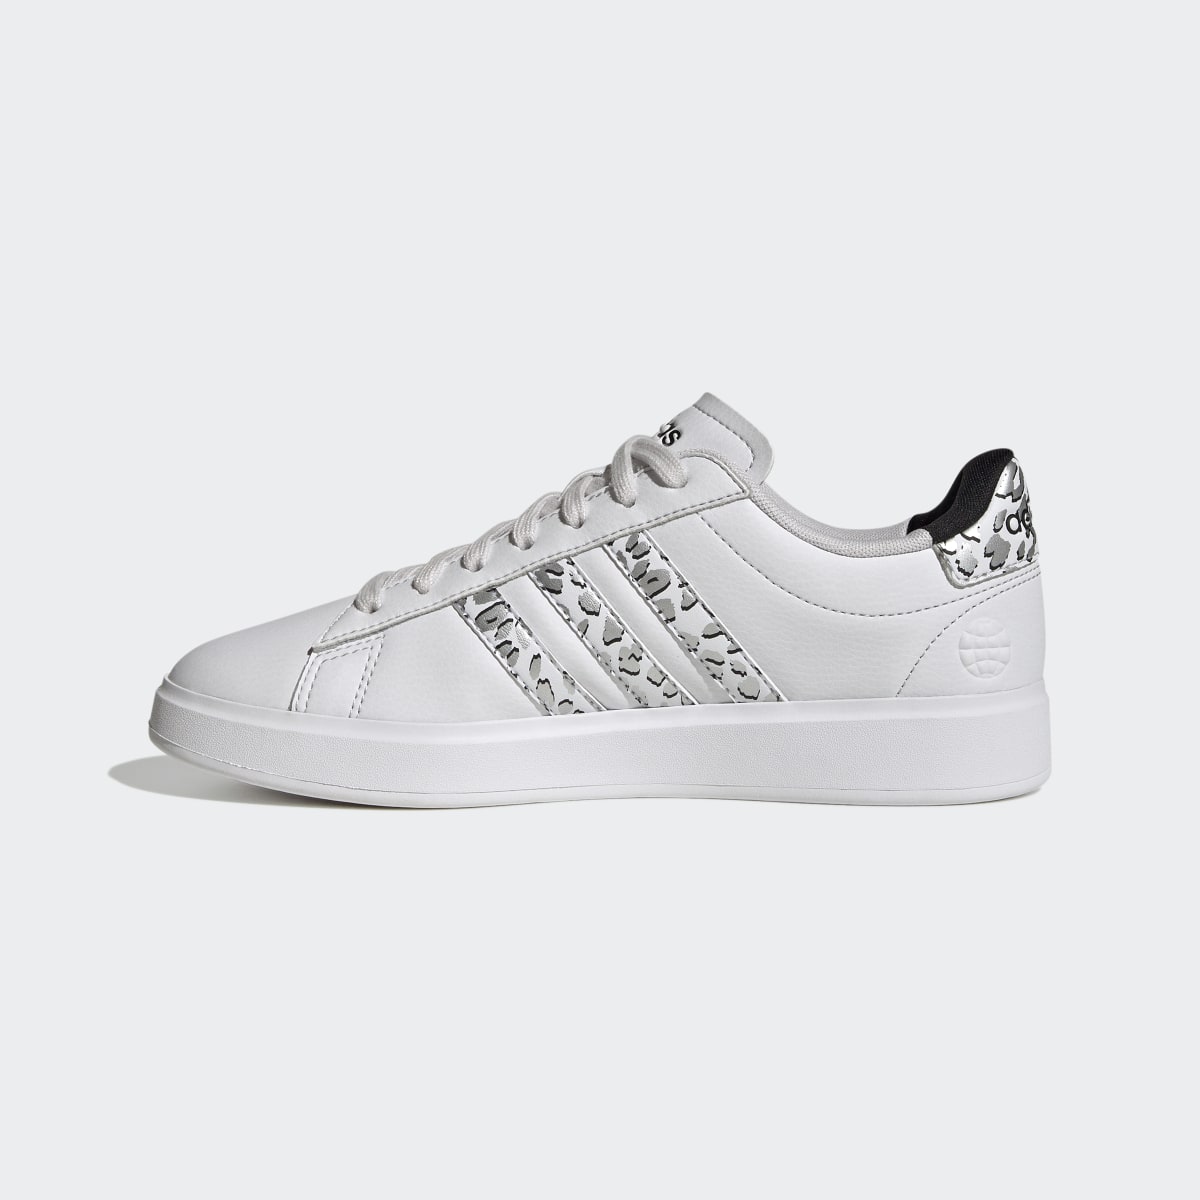 Adidas Grand Court Cloudfoam Lifestyle Court Comfort Style Schuh. 7